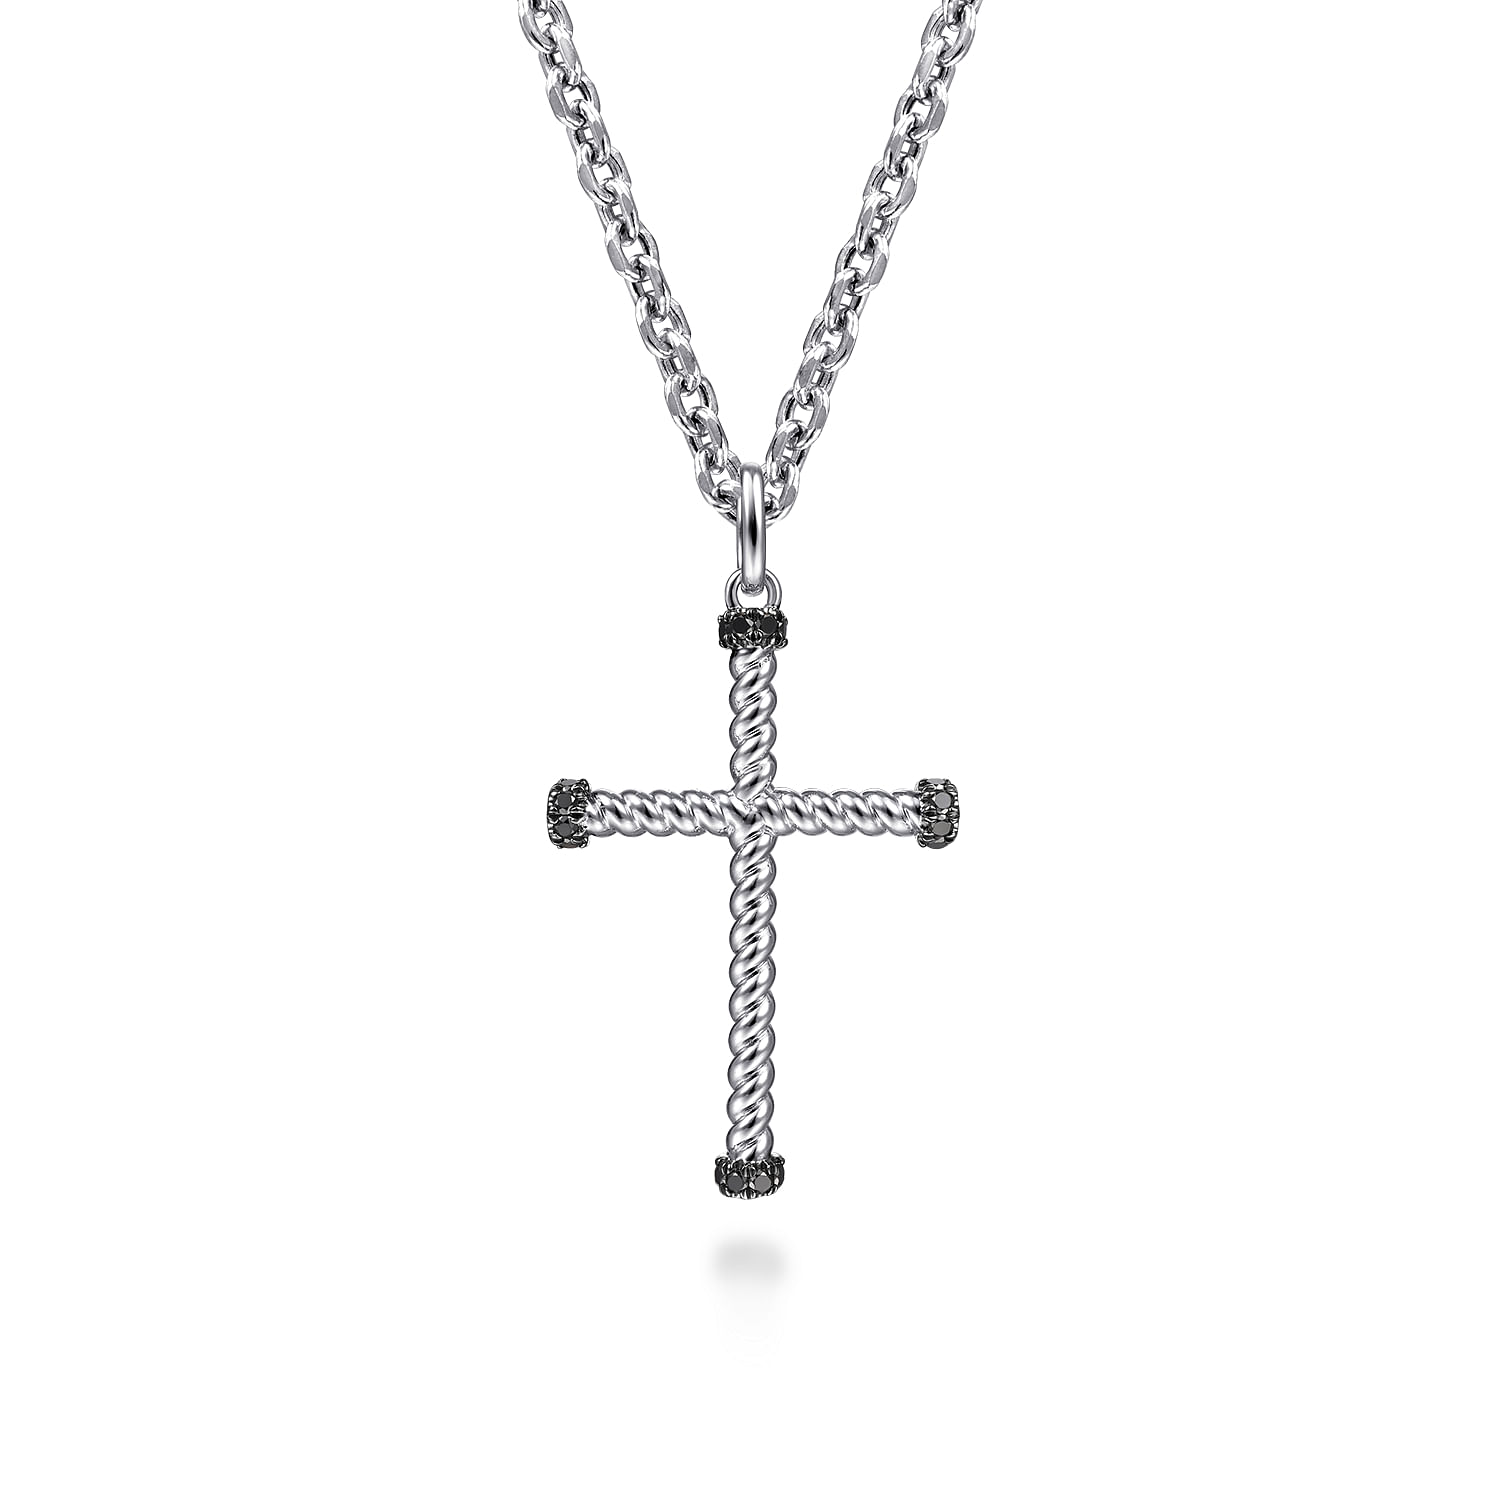 Gabriel - 22 Inch 925 Sterling Silver Twisted Rope Cross Solid Link Chain Necklace with Black Spinel